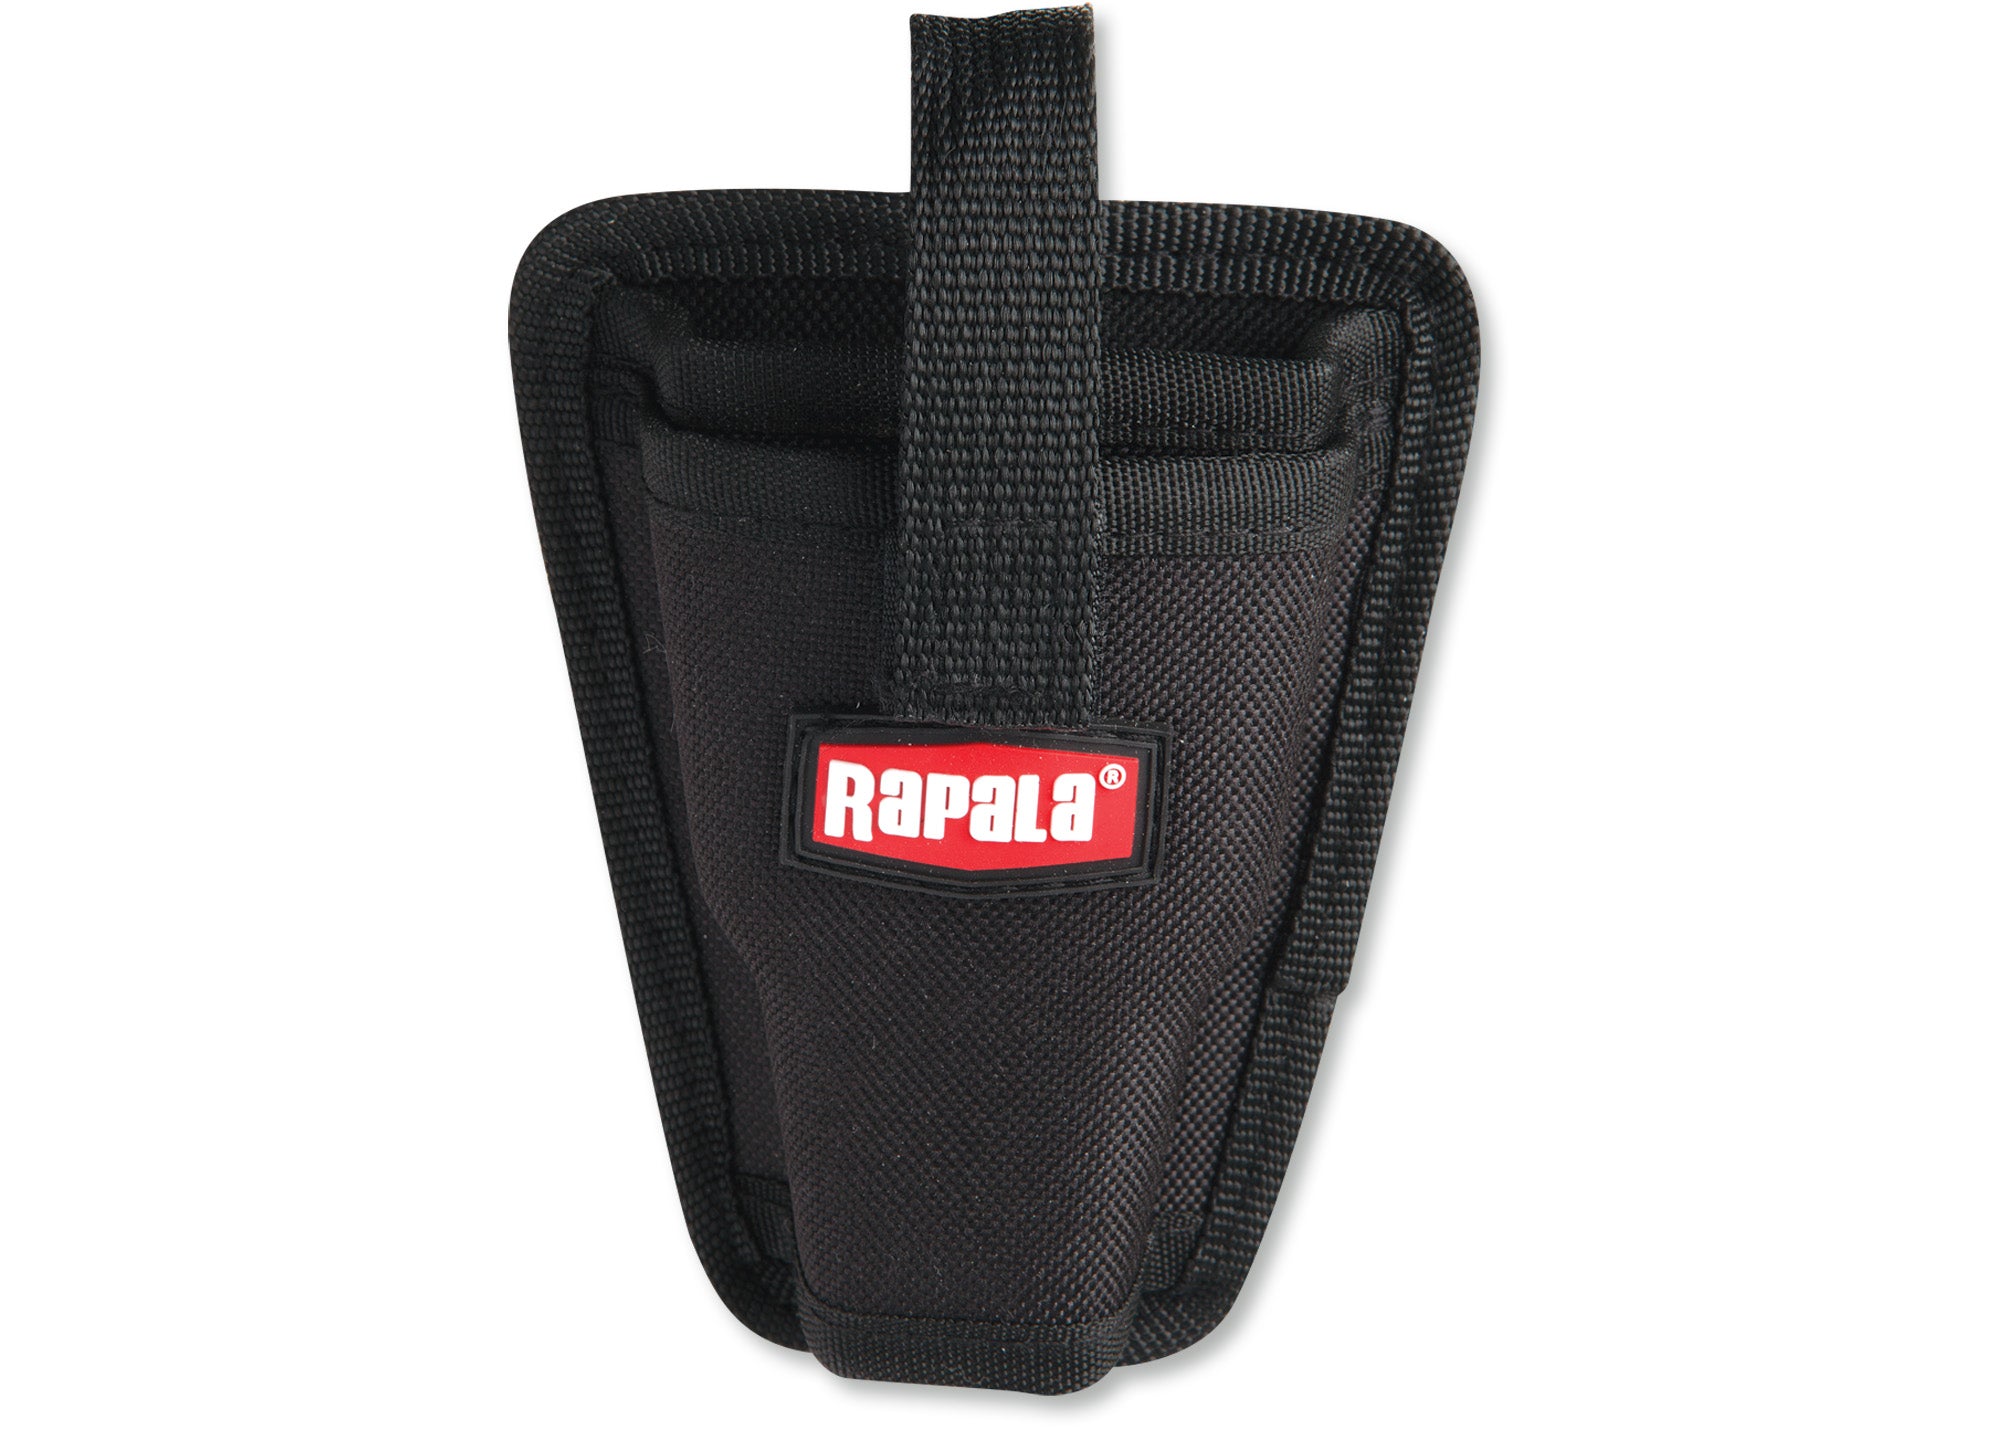 Rapala LOCK'N HOLD Rod Rack – Canadian Tackle Store